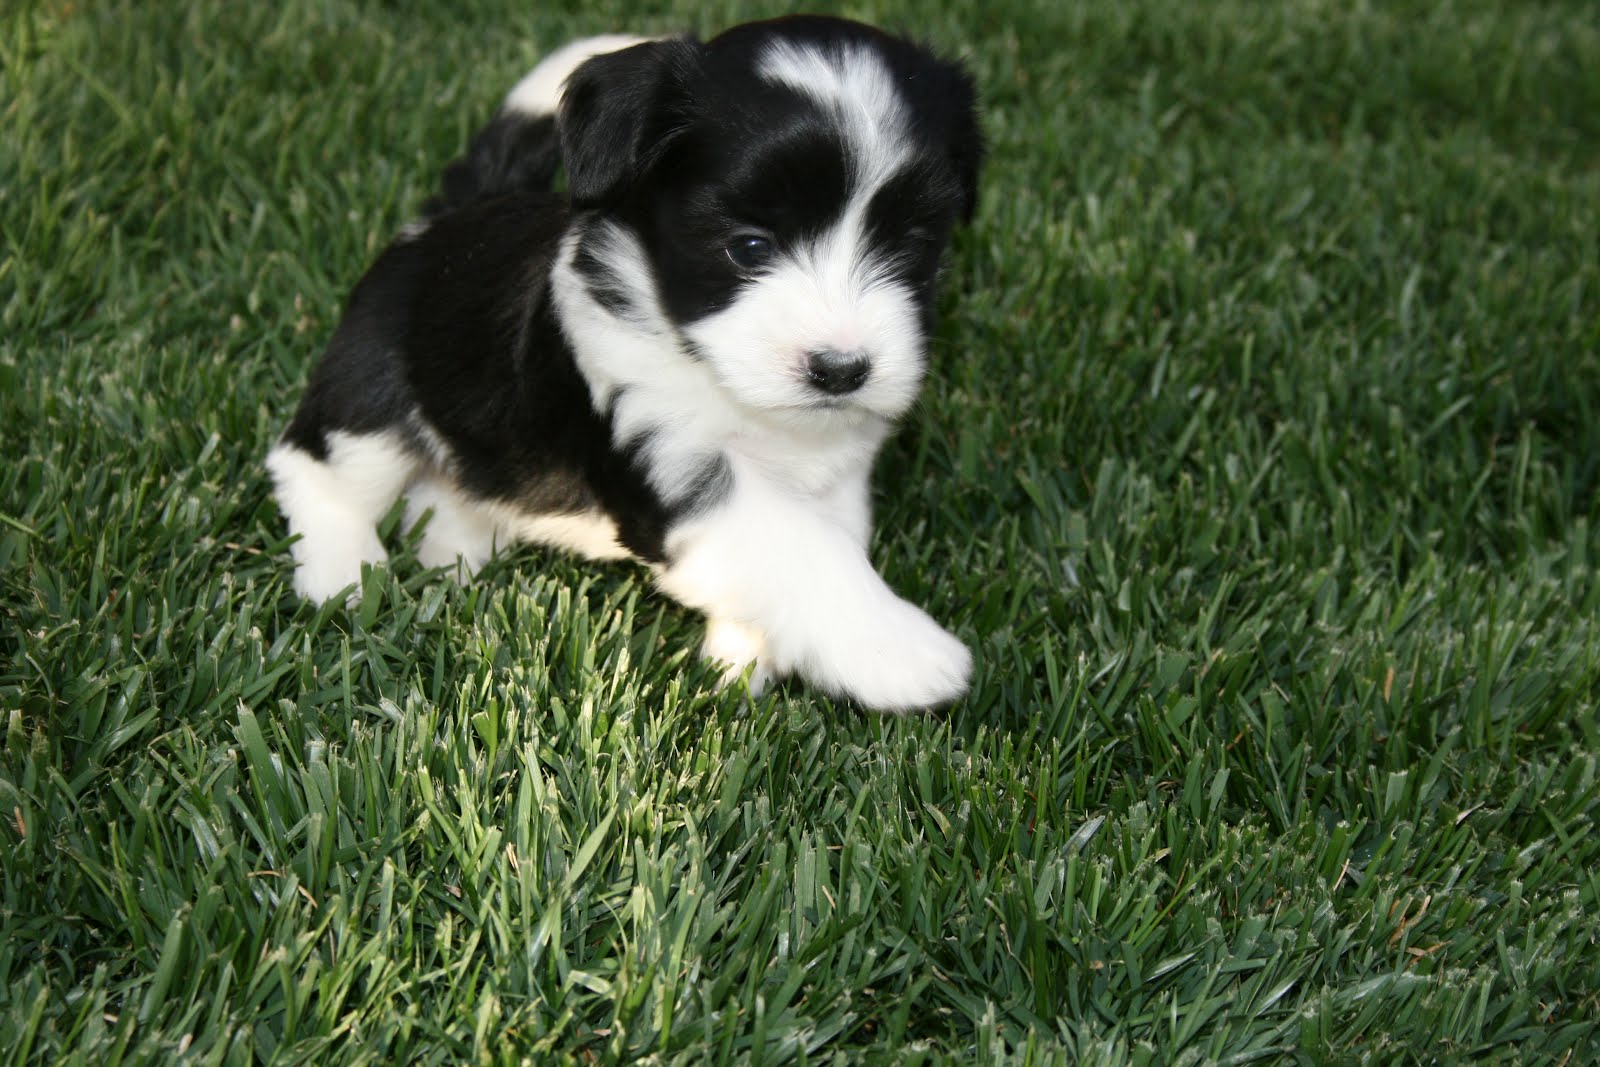 Available Puppies: Havanese puppies are 4 weeks old!1600 x 1067